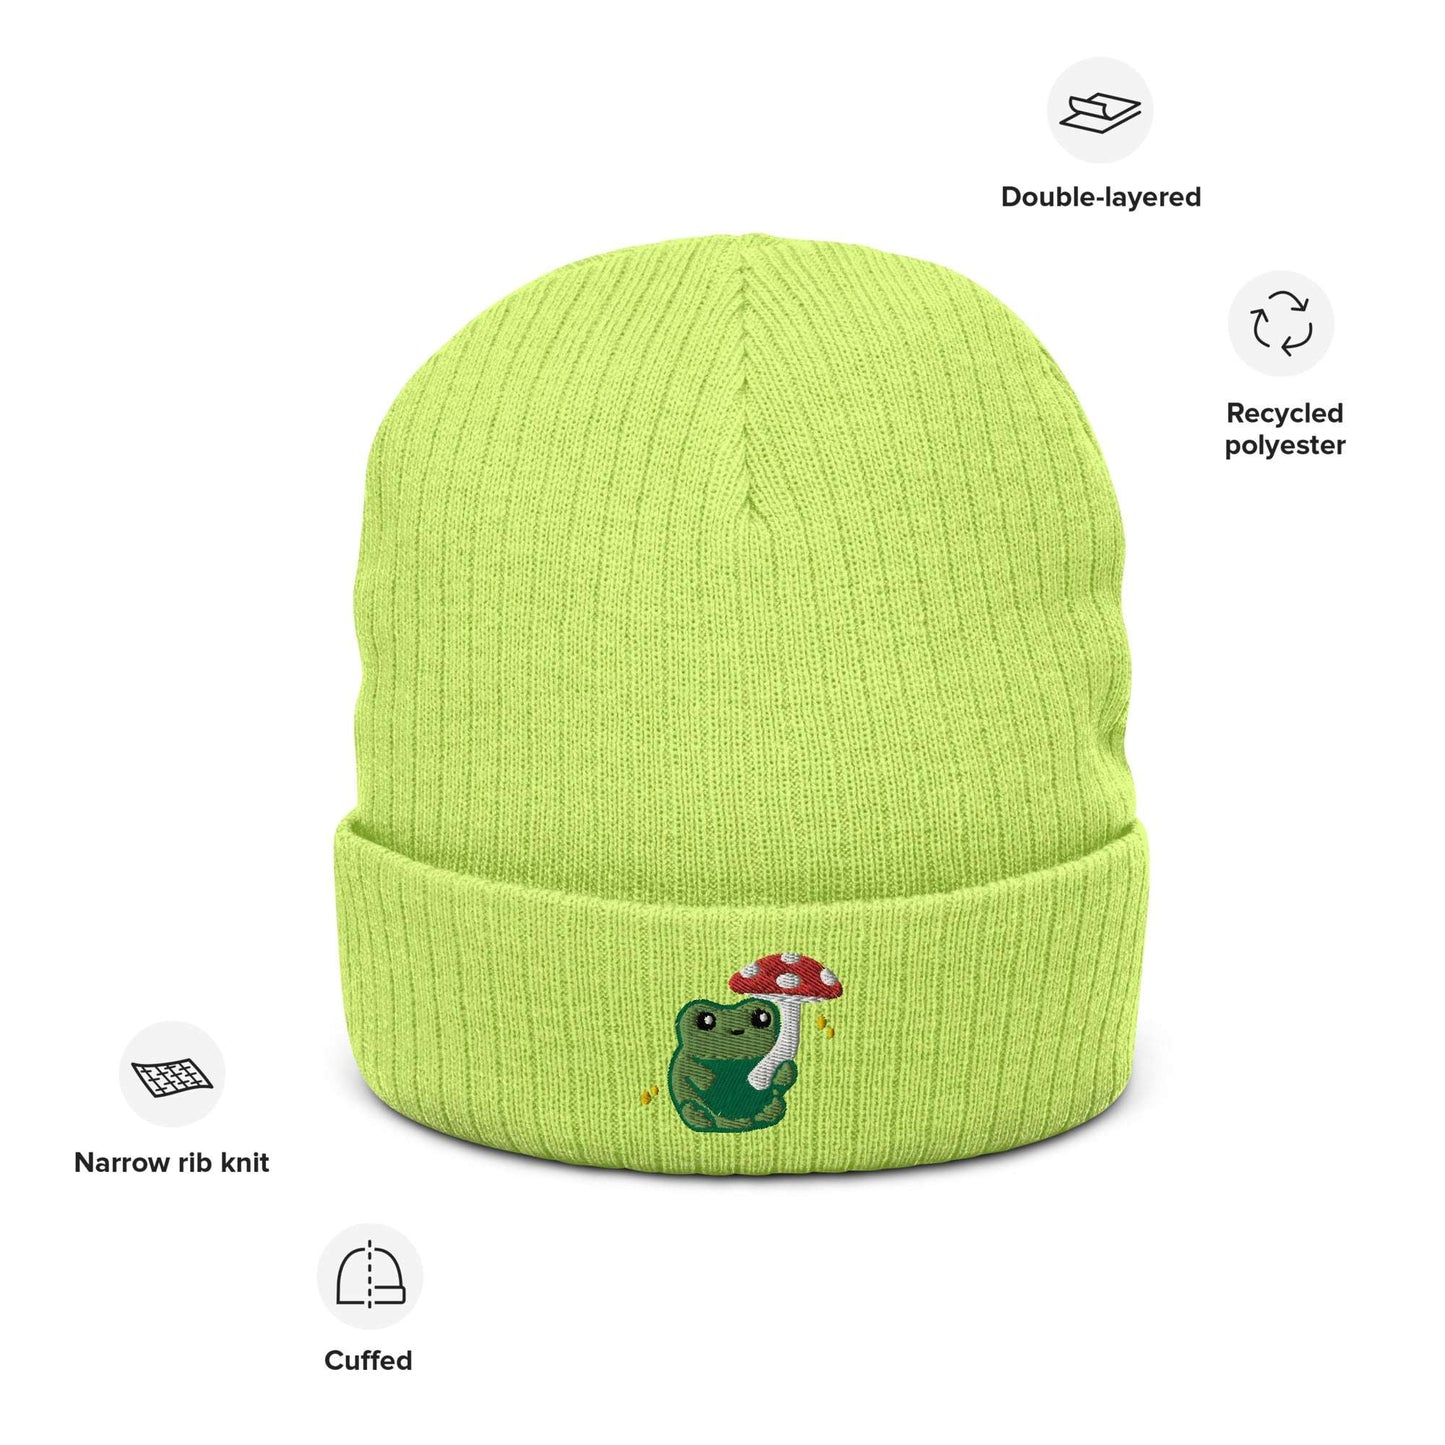 Ribbed Knit Beanie with Cute Embroidered Frog holding a Mushroom Umbrella